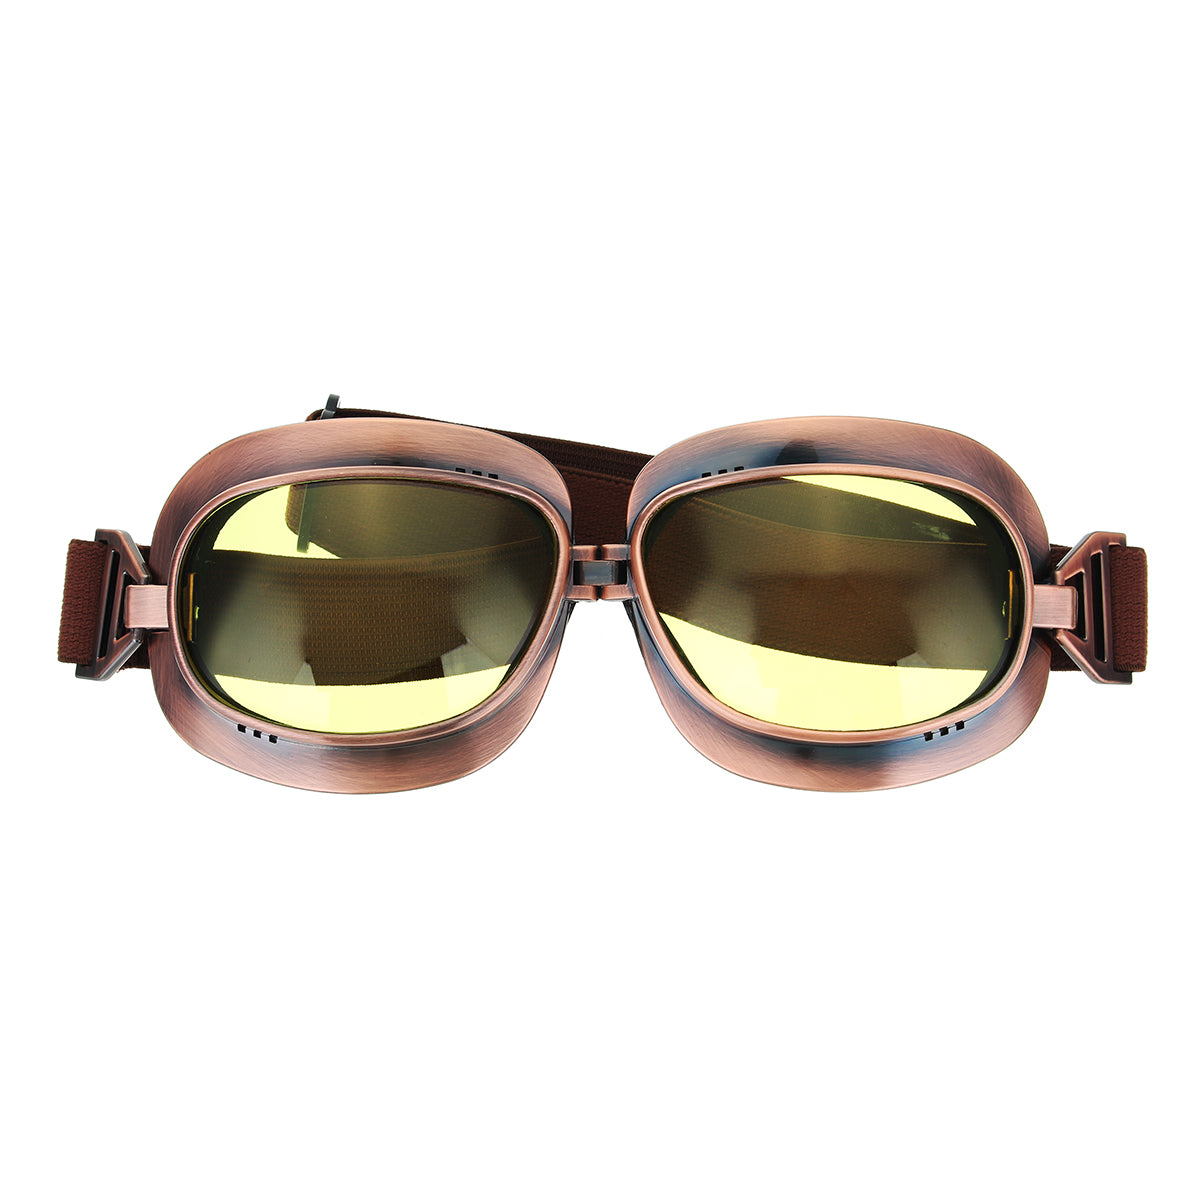 Dark Olive Green Retro Motorcycle Goggles Vintage Windproof Riding Glasses Silver/Bronze Frame